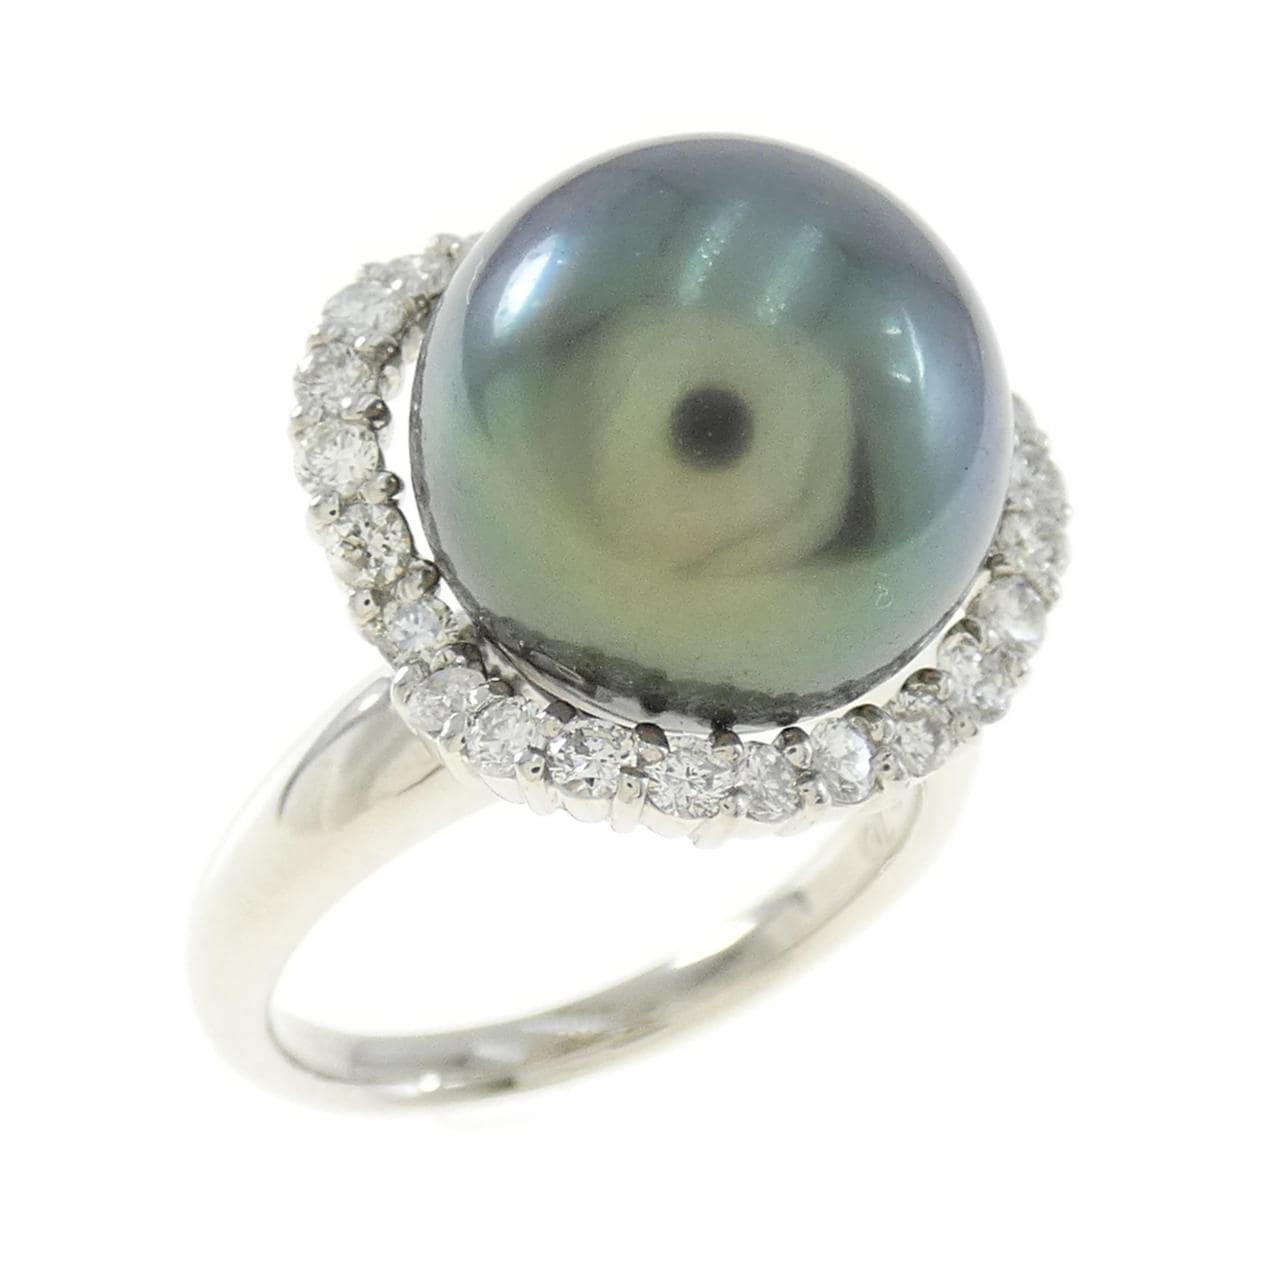 PT Black Butterfly Pearl Ring 11.8mm